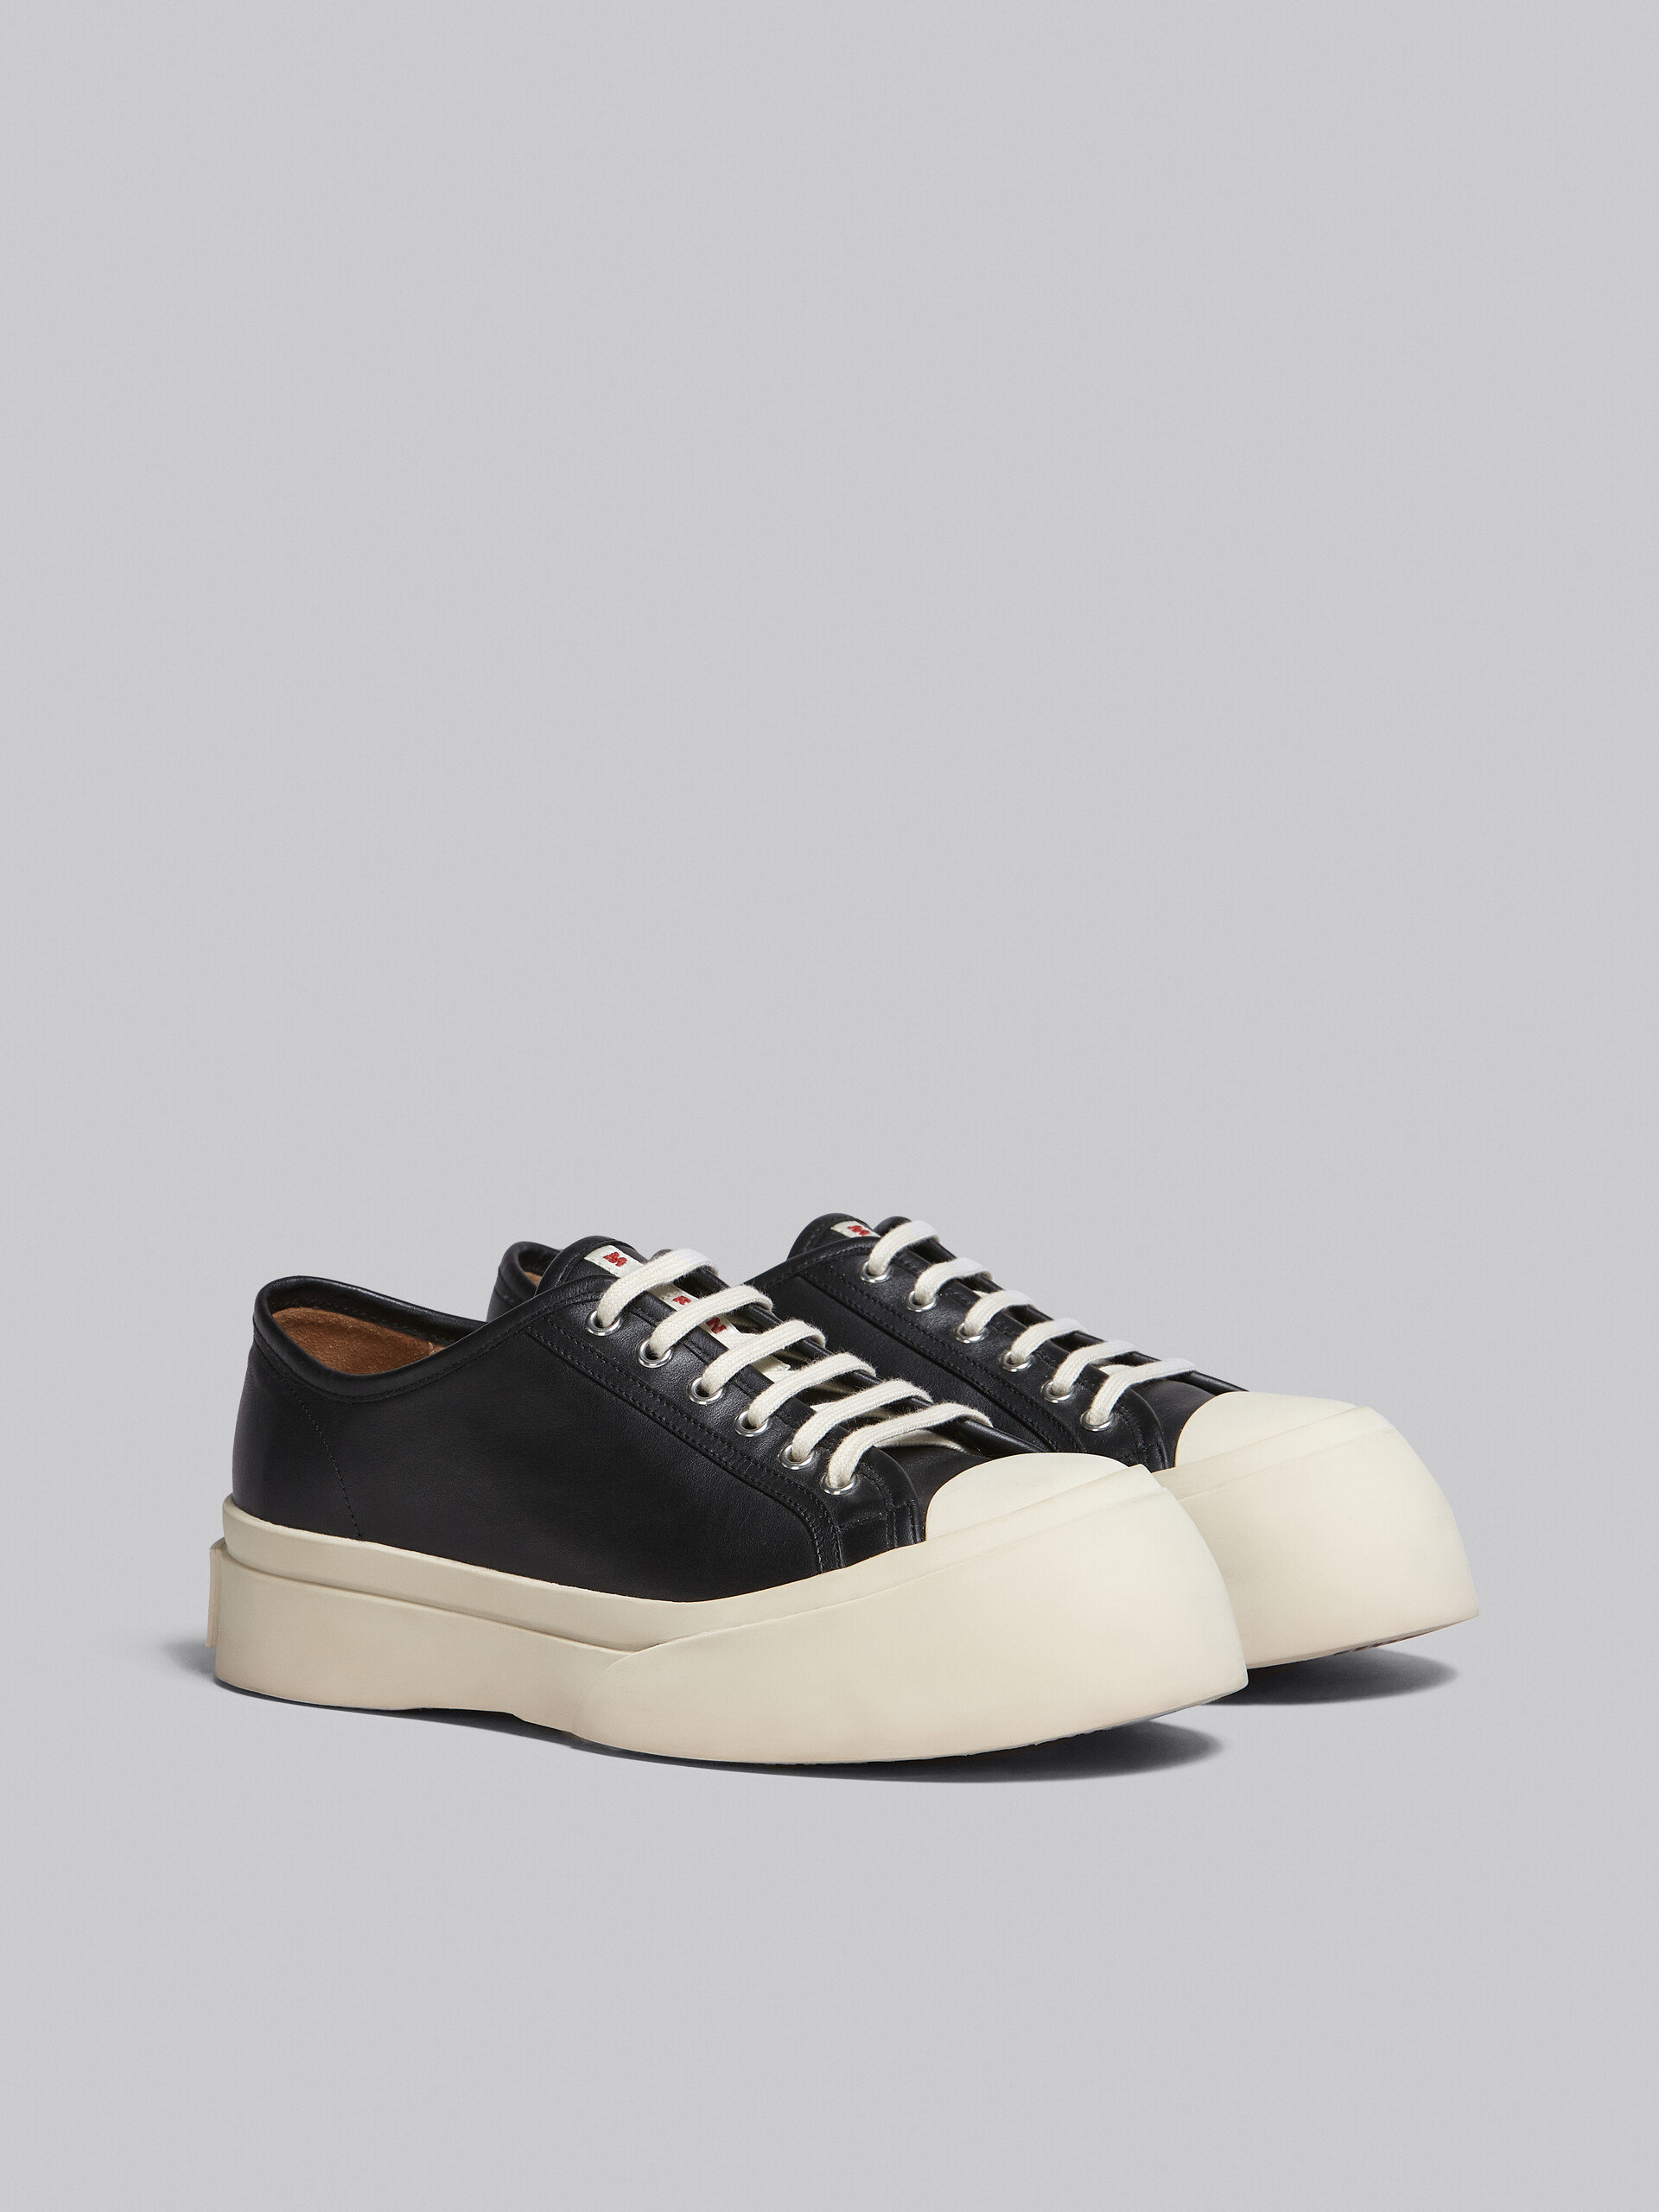 Black nappa leather PABLO lace-up sneaker - Sneakers - Image 2